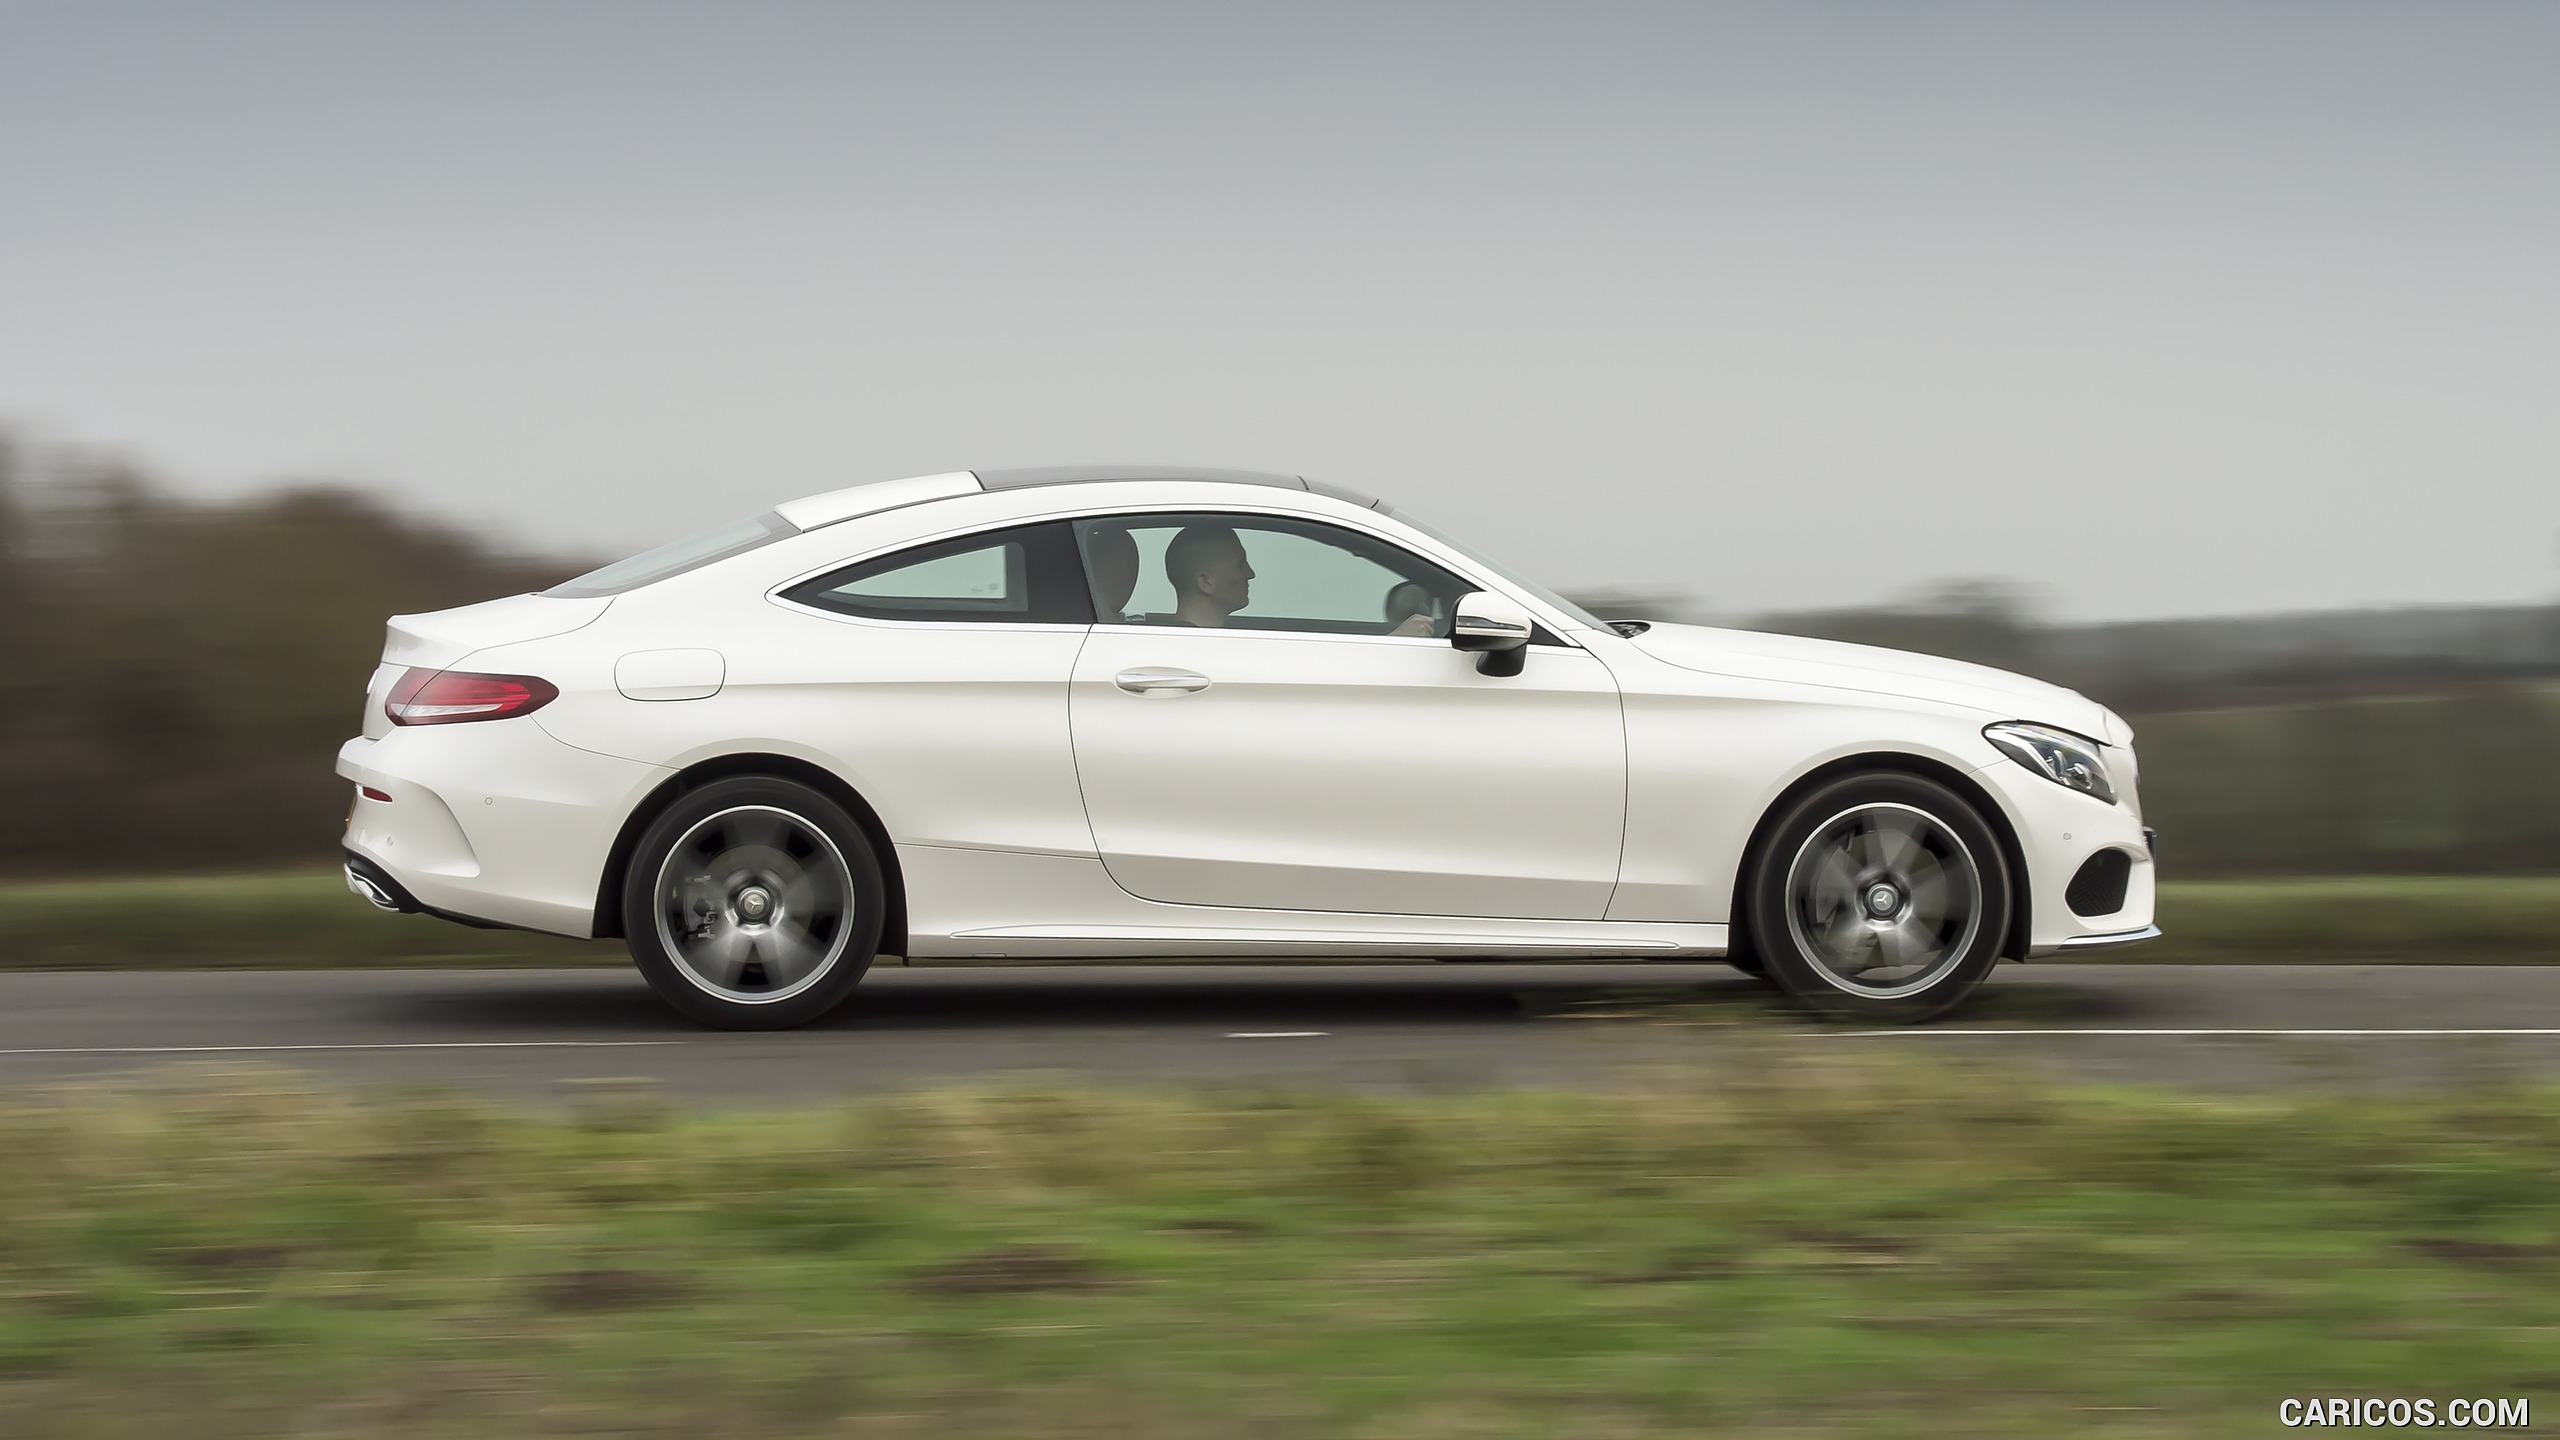 2017 Mercedes-Benz C-Class Coupe (UK-Spec) - Side, #125 of 210